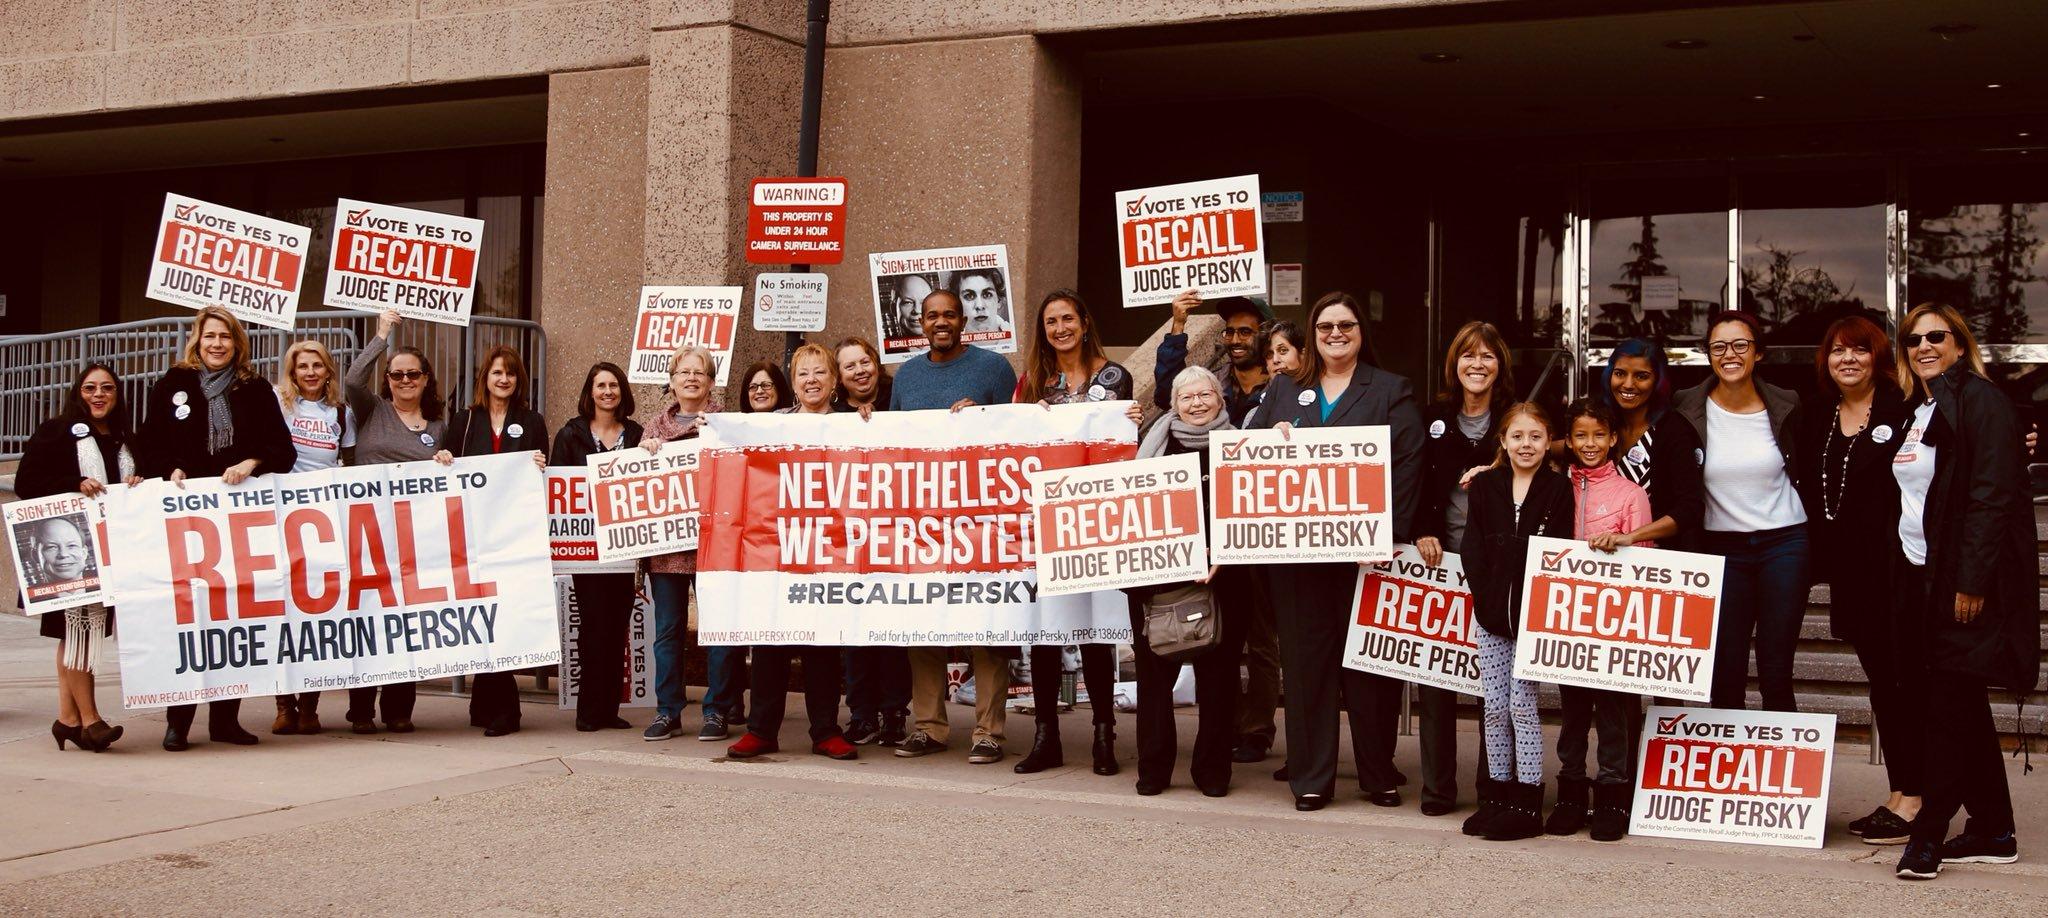 Supporters of the campaign to recall Judge Persky on